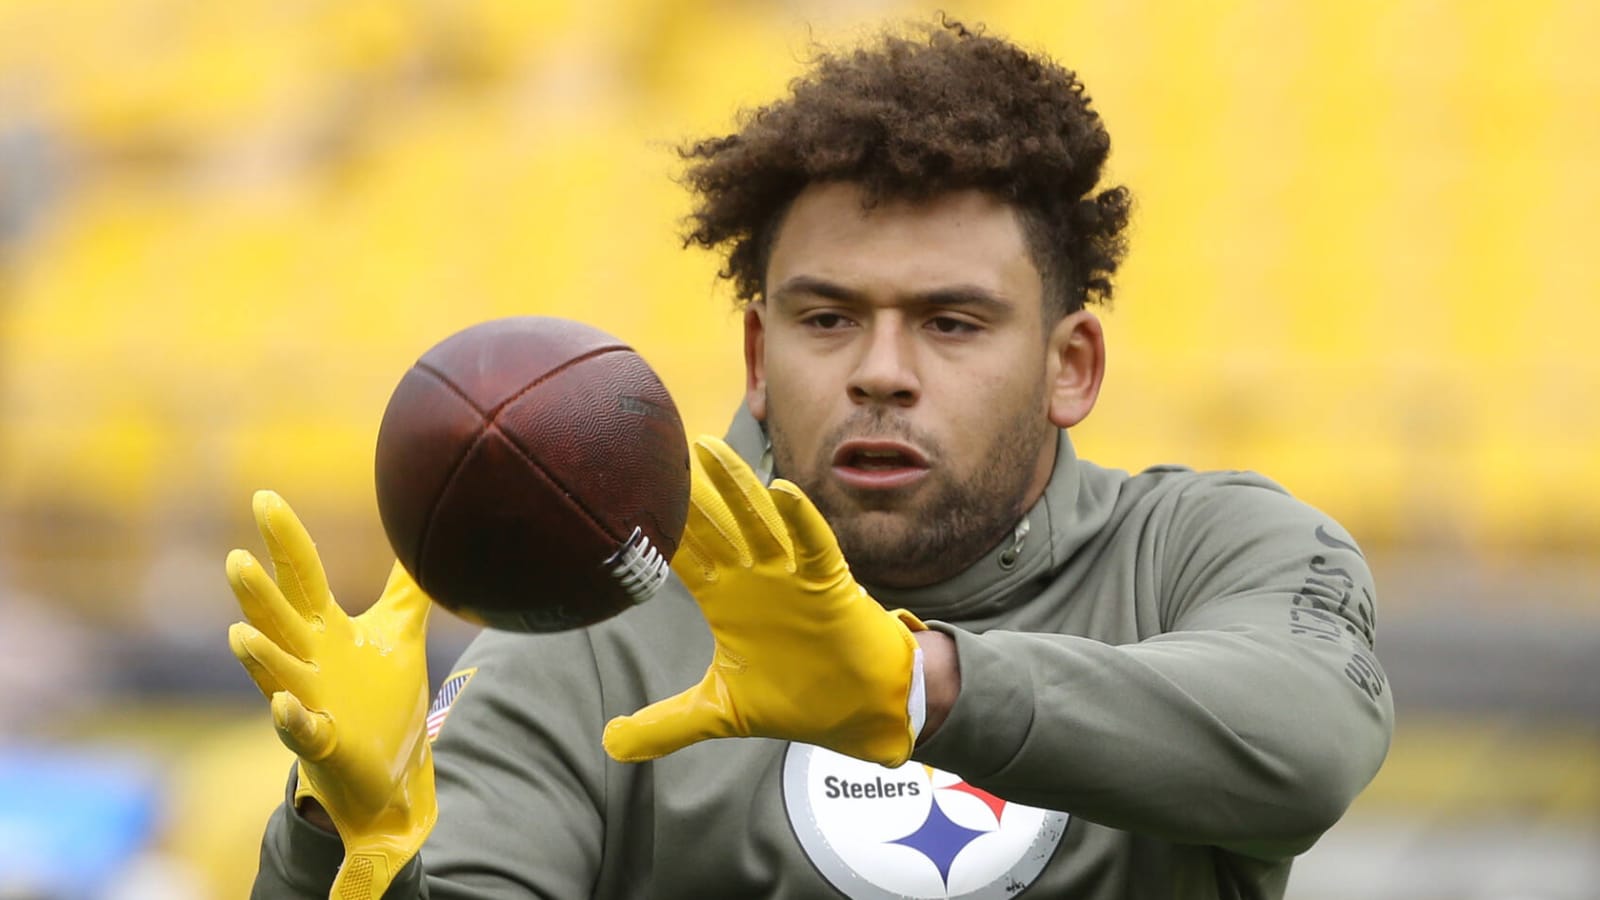 Steelers hybrid weapon puts NFL on notice